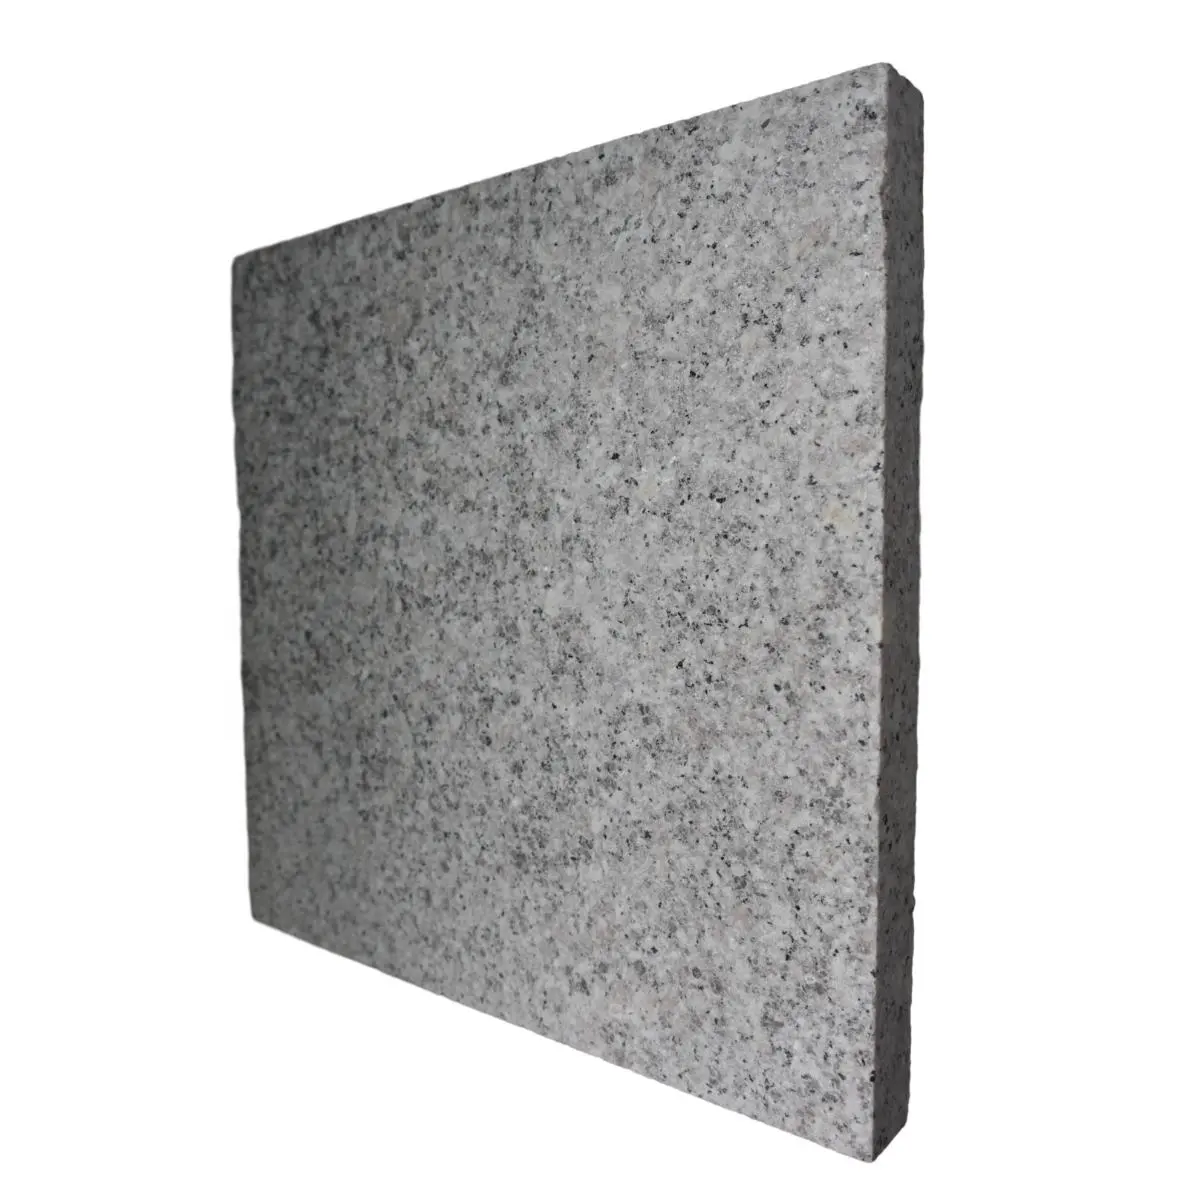 Quality Reliable Outdoor Stone Granite Brick Exterior Wall Cladding Tiles